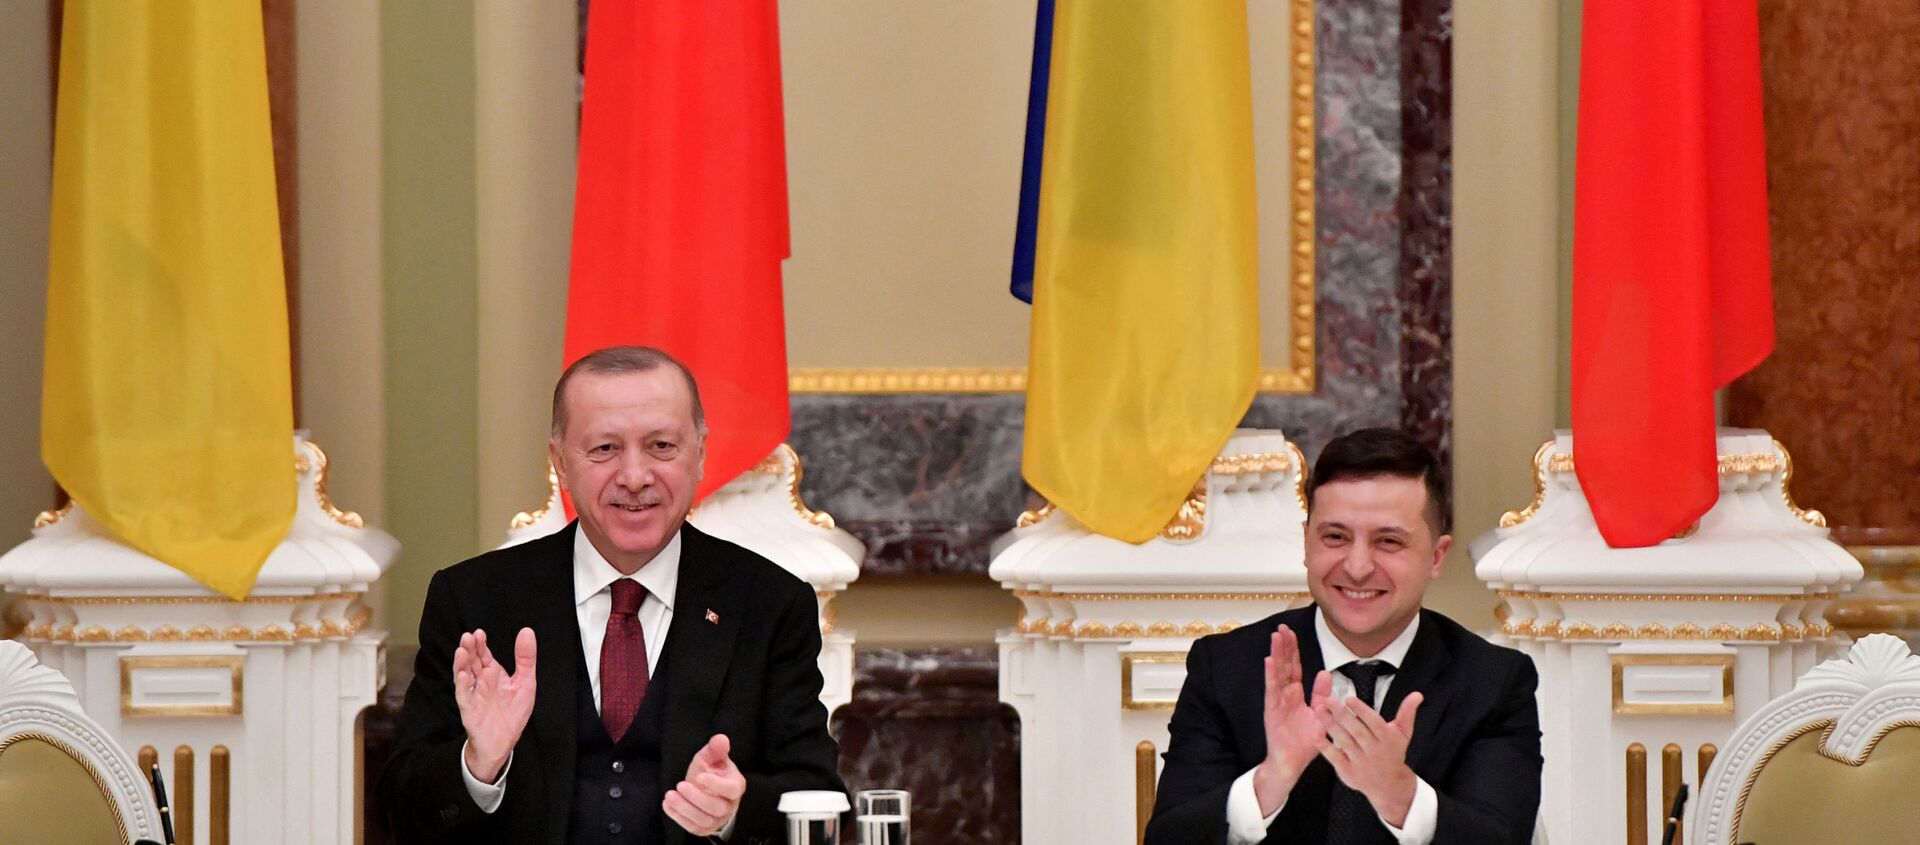 Ukrainian President Volodymyr Zelensky and his Turkish counterpart Recep Tayyip Erdogan react during a joint press conference following their meeting in Kiev on February 3, 2020. (Photo by Sergei SUPINSKY / AFP) - Sputnik International, 1920, 13.04.2021